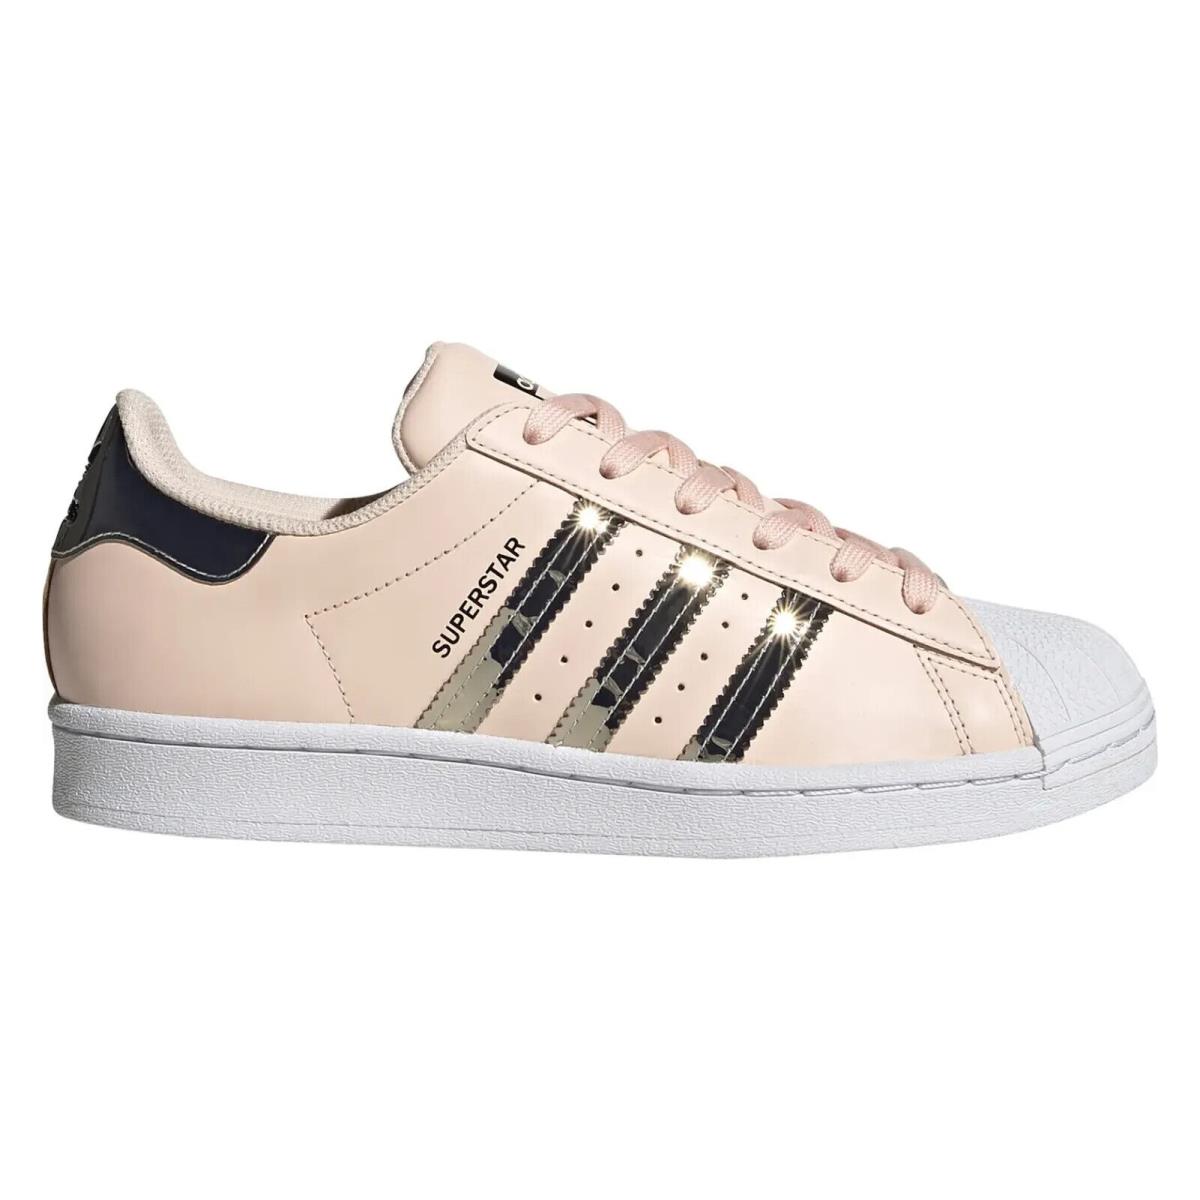 Adidas Originals Superstar Pink Tint Silver White Womens Casual Shoes FW5014-NEW - Pink